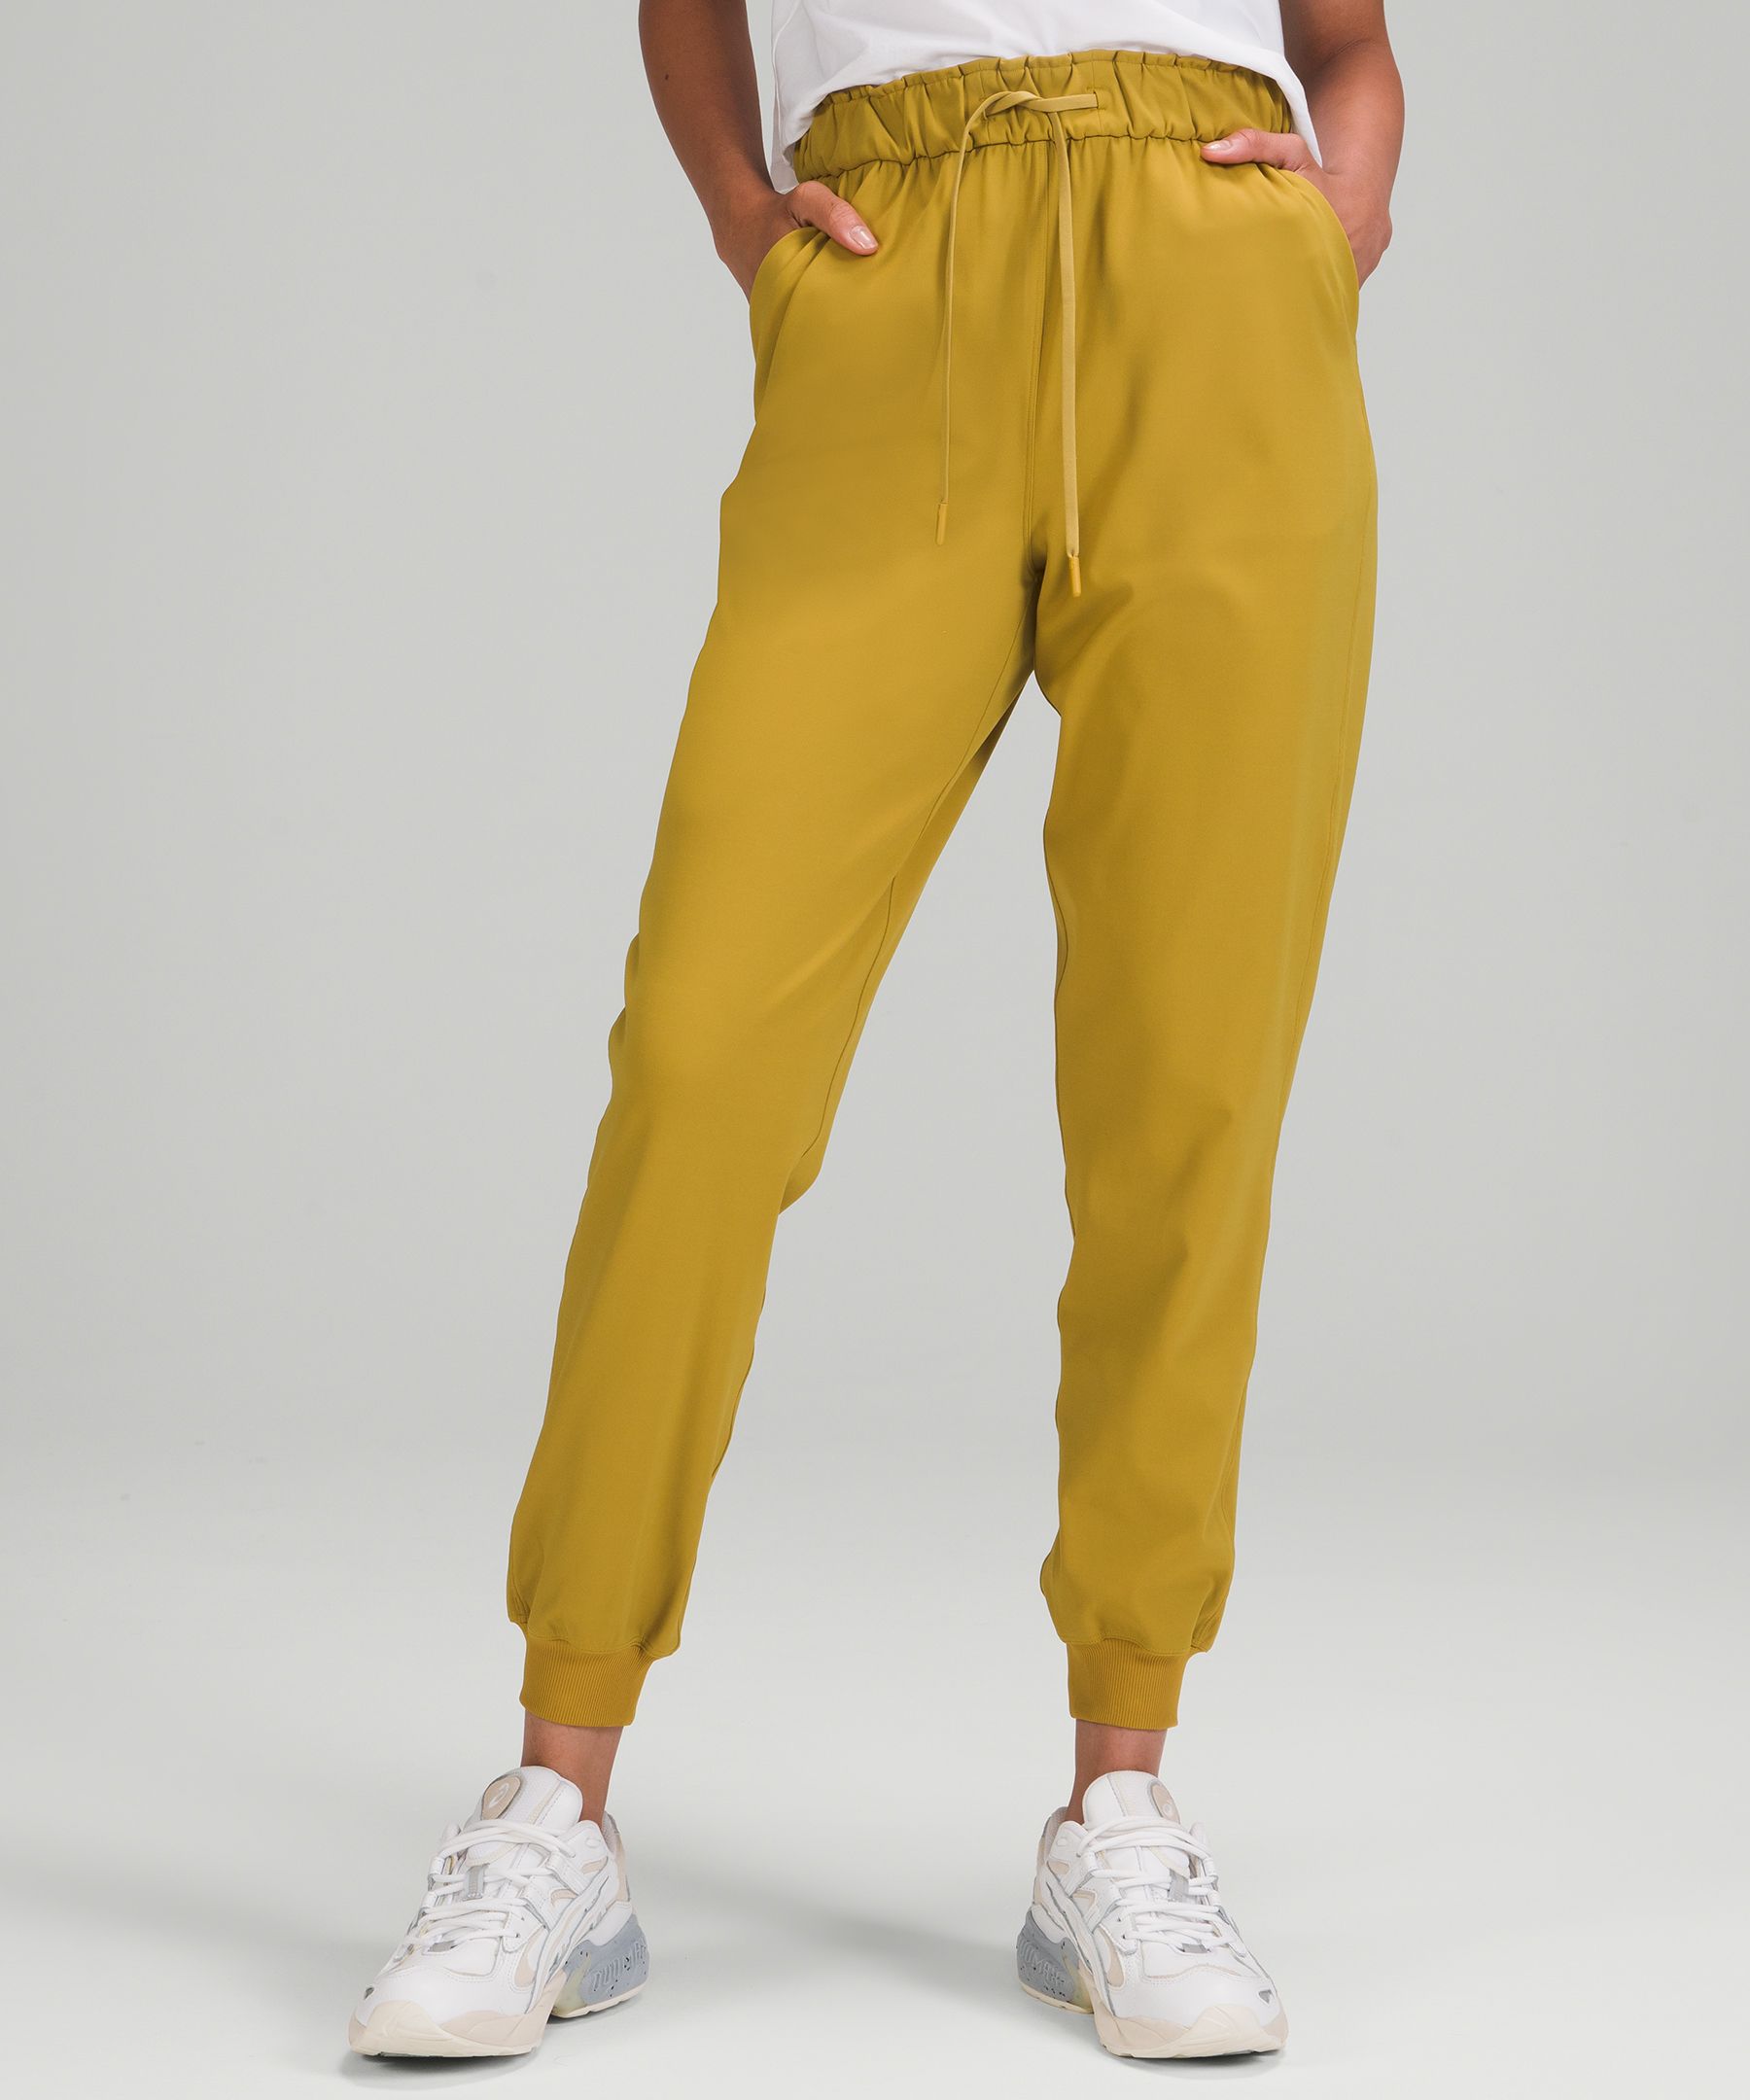 Lululemon Stretch High-rise Joggers Full Length In Auric Gold